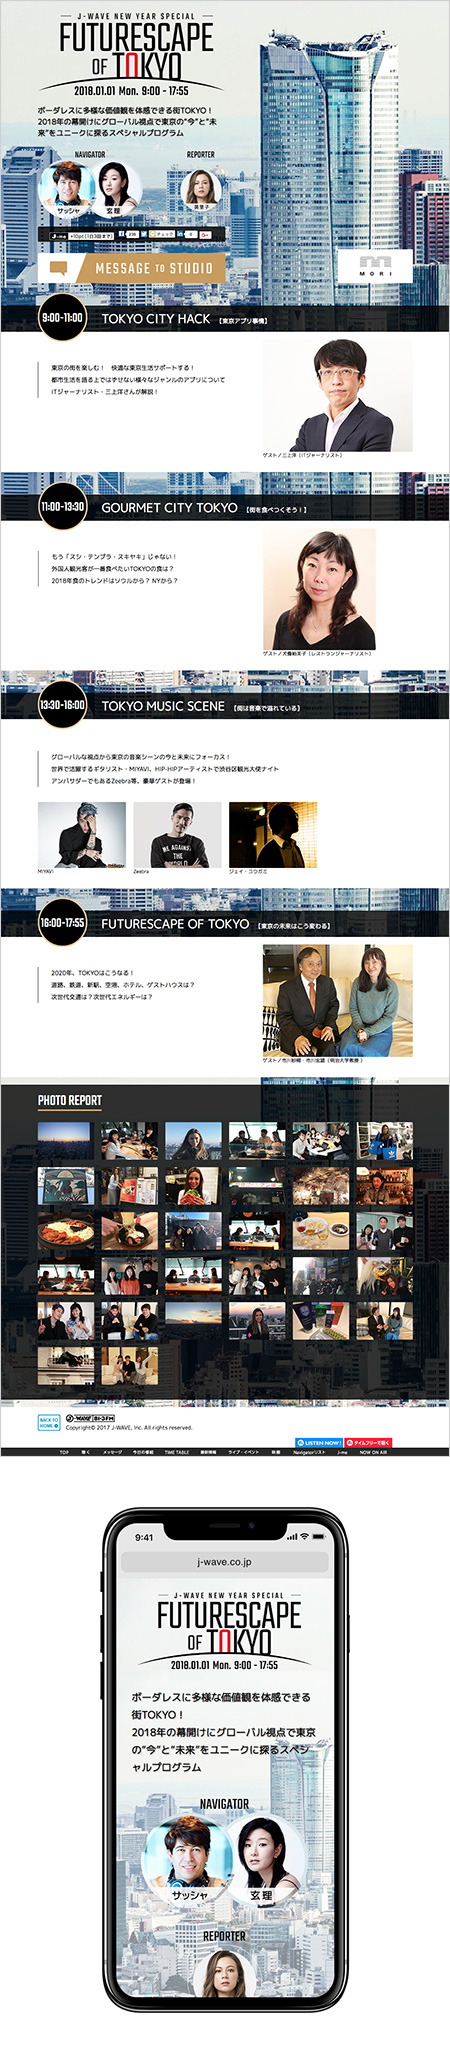 J-WAVE NEW YEAR SPECIAL『FUTURESCAPE OF TOKYO』